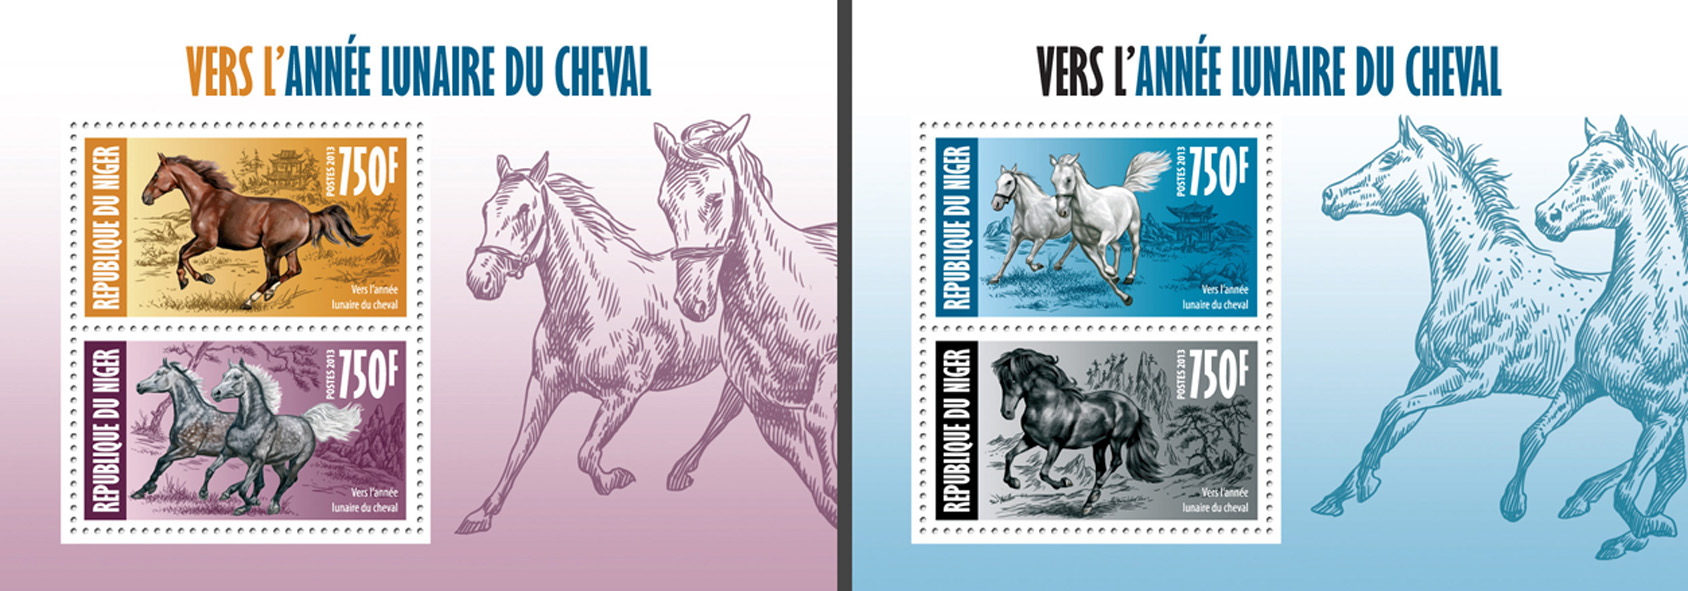 Year of the horse - Issue of Niger postage stamps